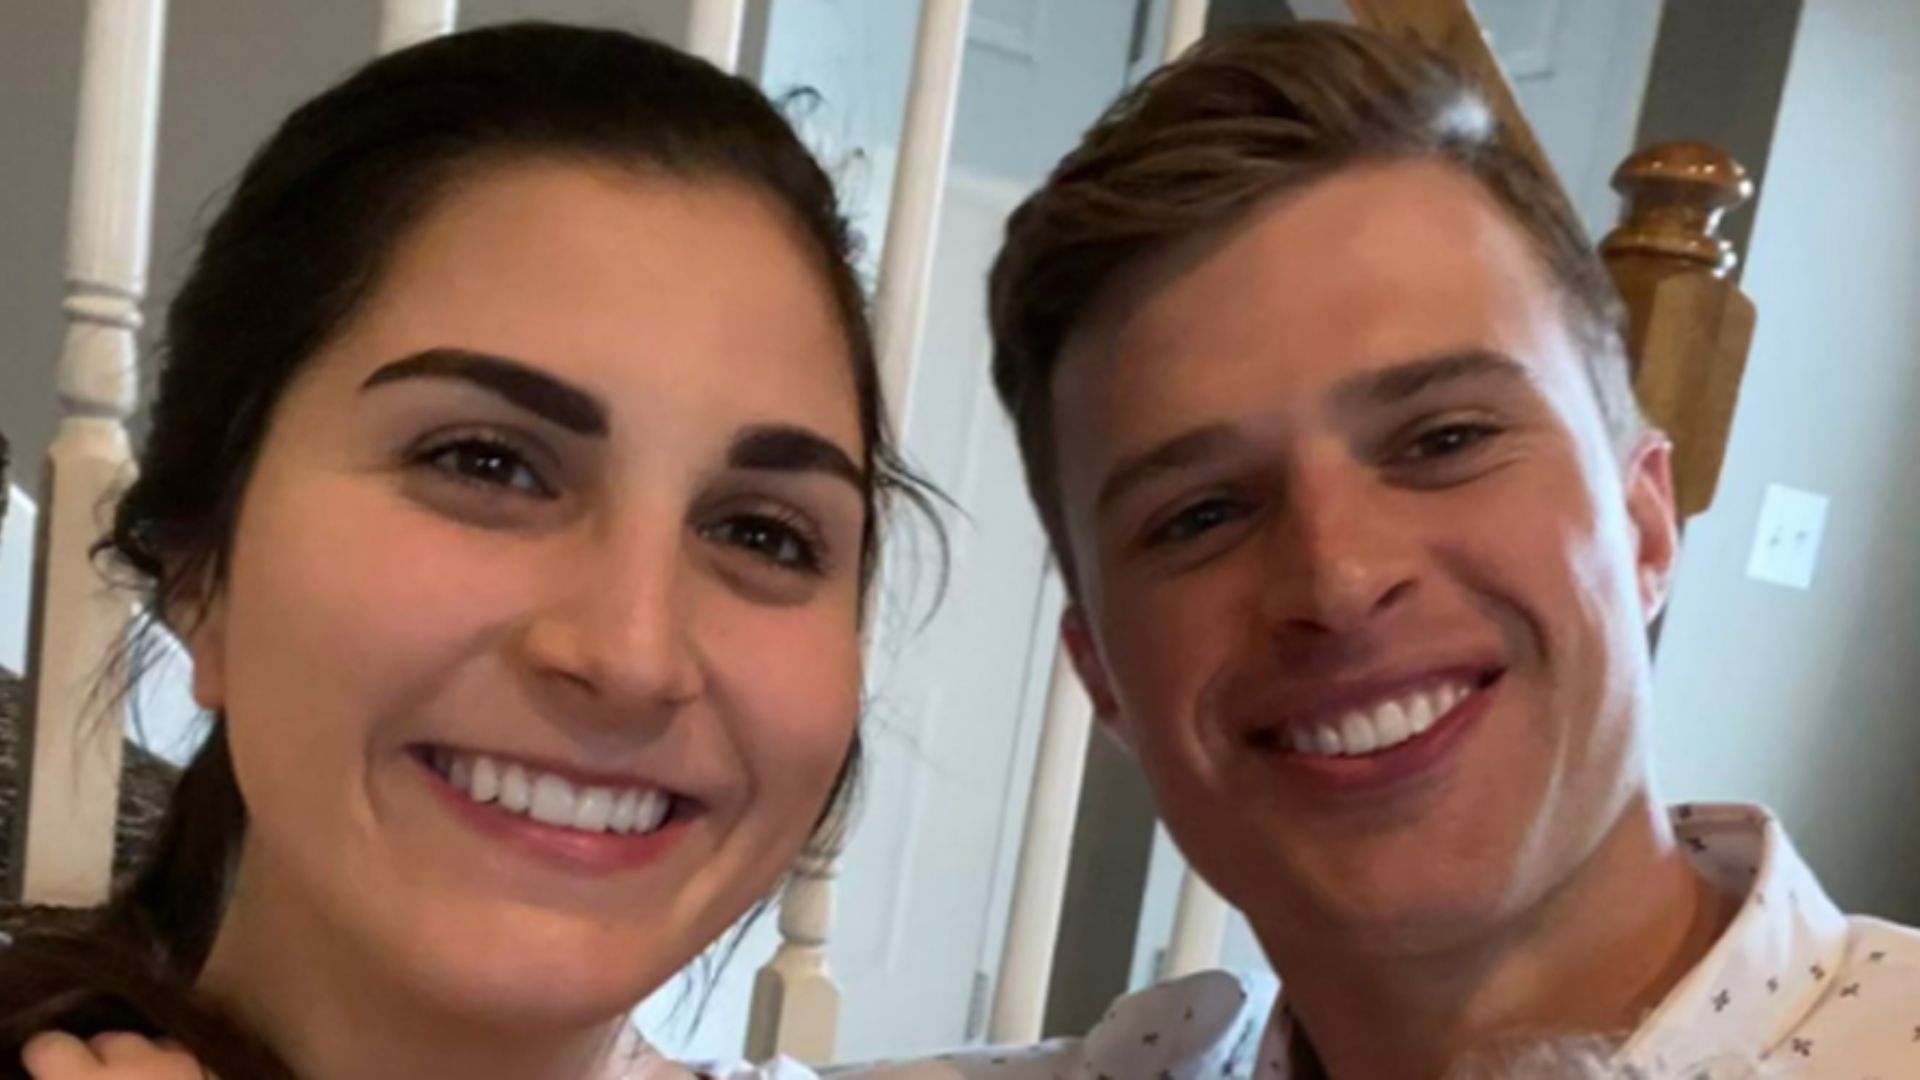 Harrison Butker With Wife Both Smiling